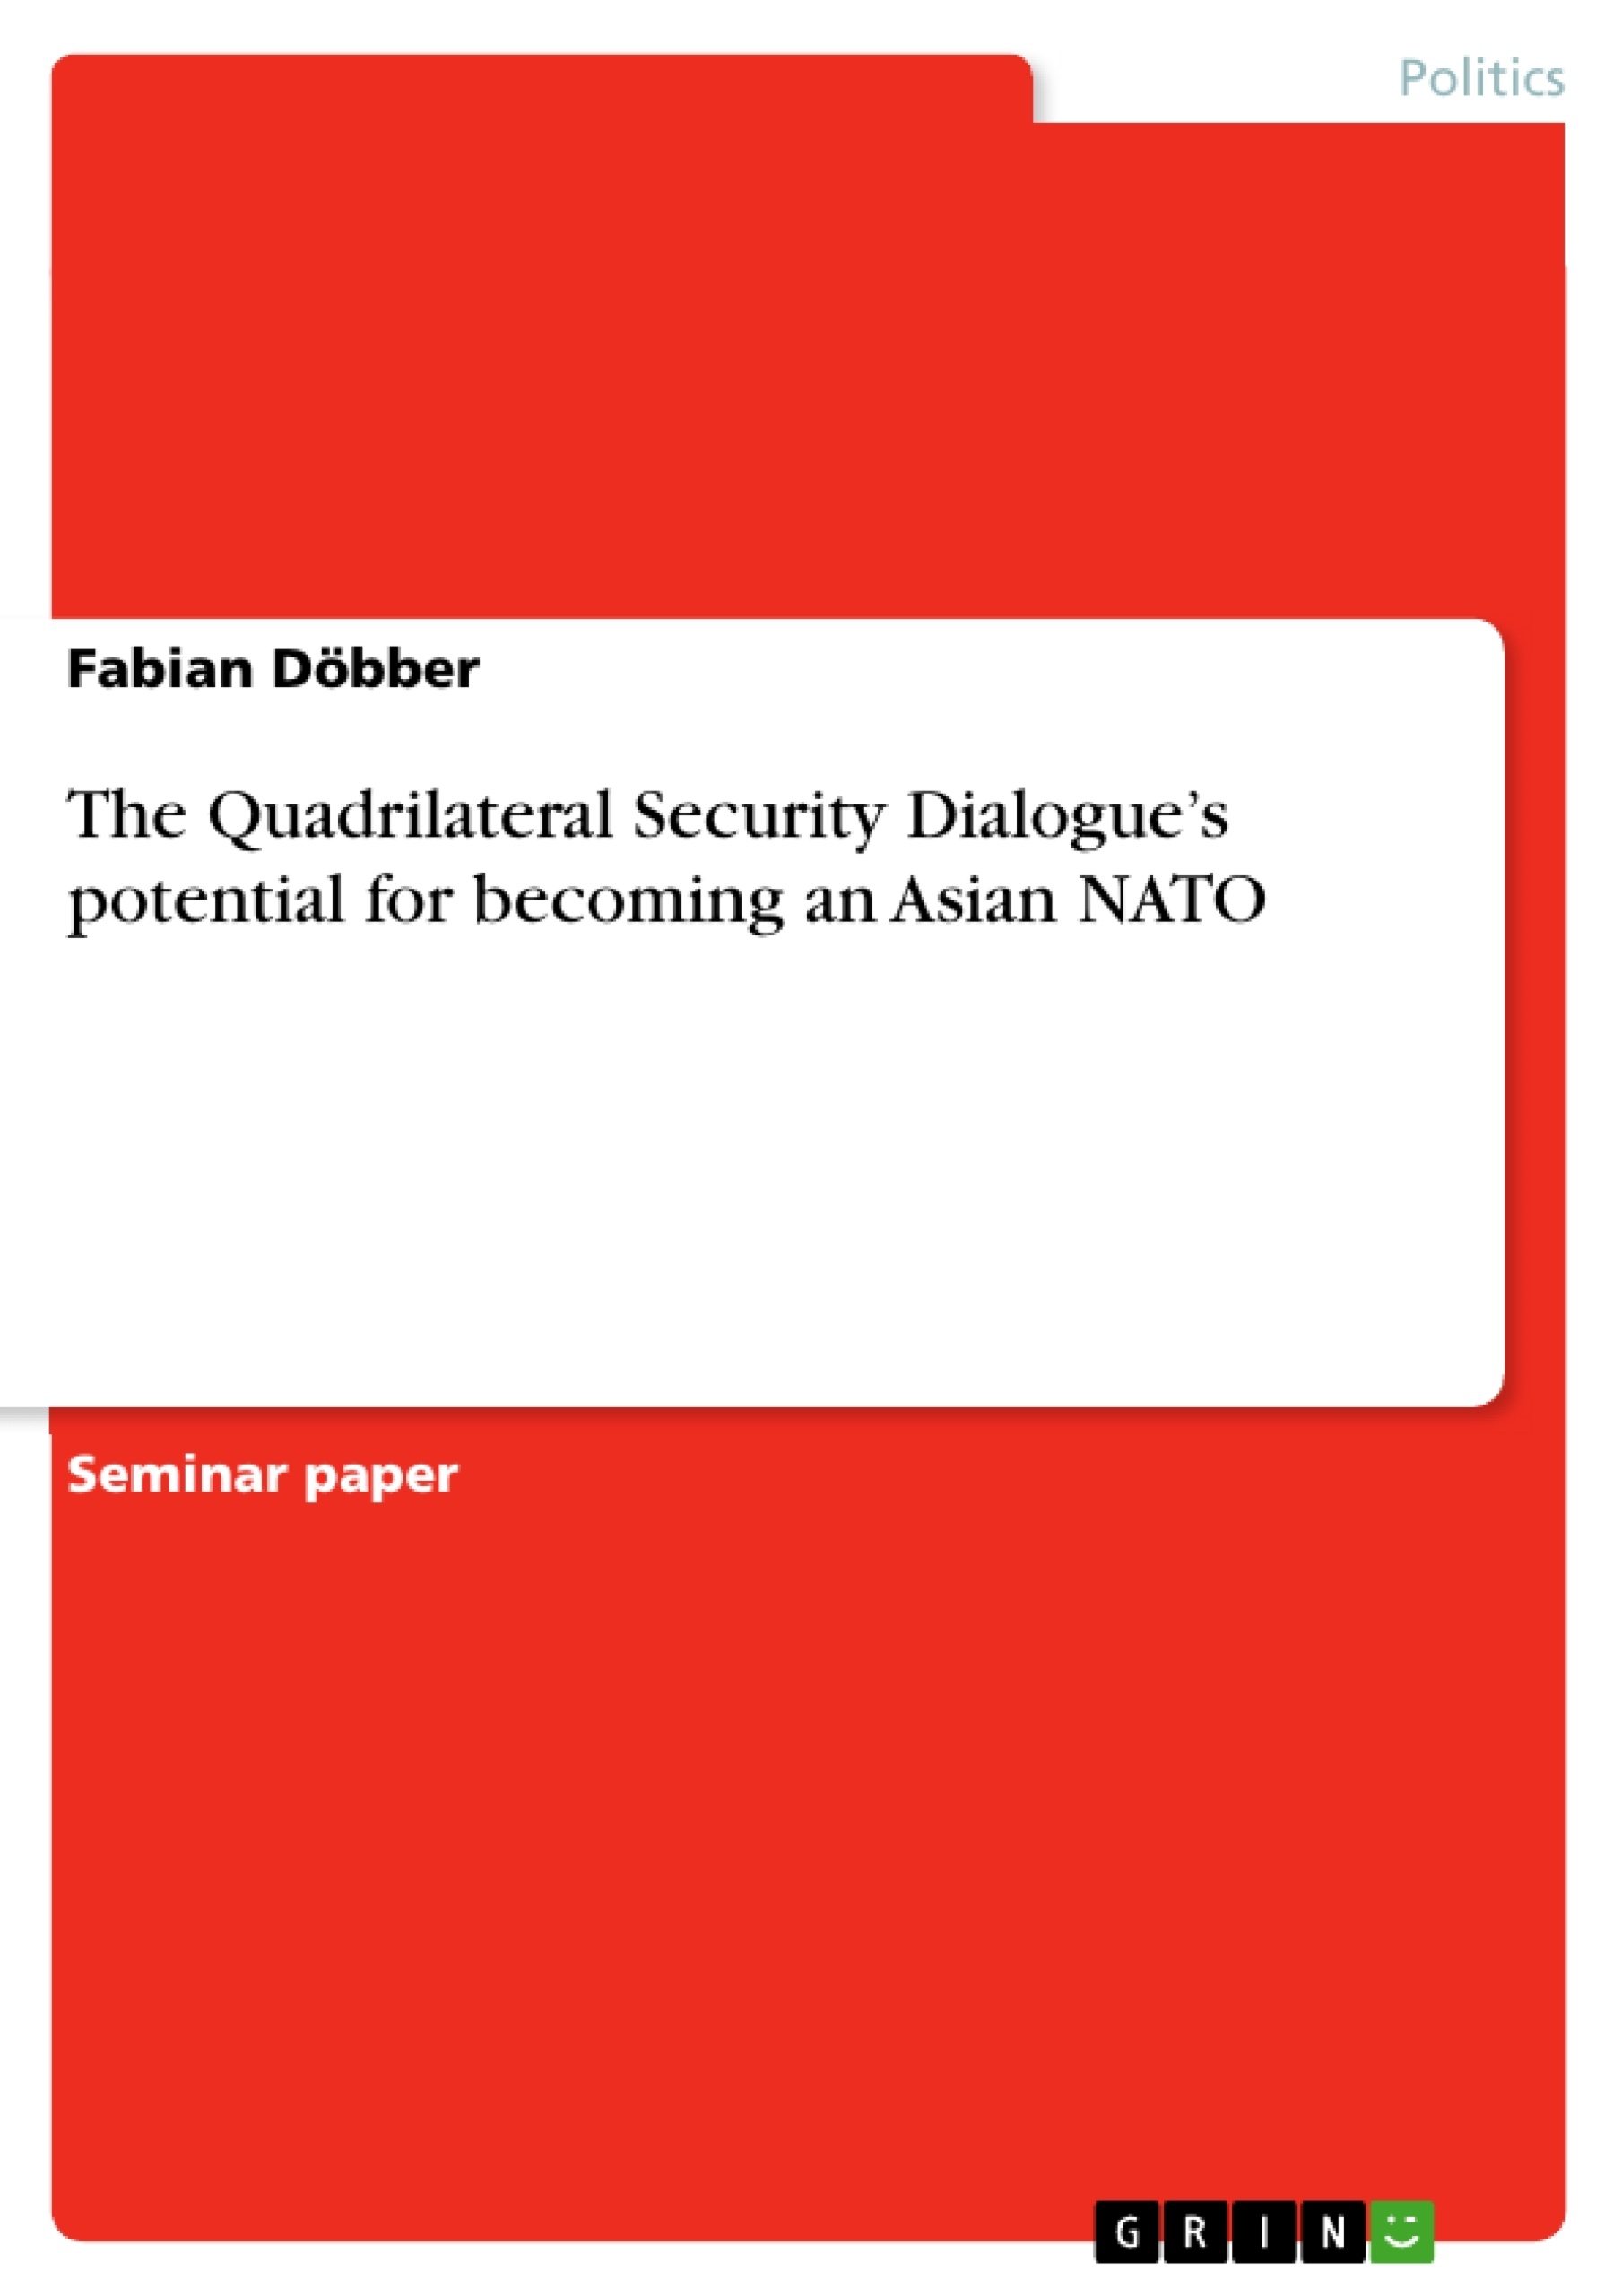 Title: The Quadrilateral Security Dialogue’s potential for becoming an Asian NATO